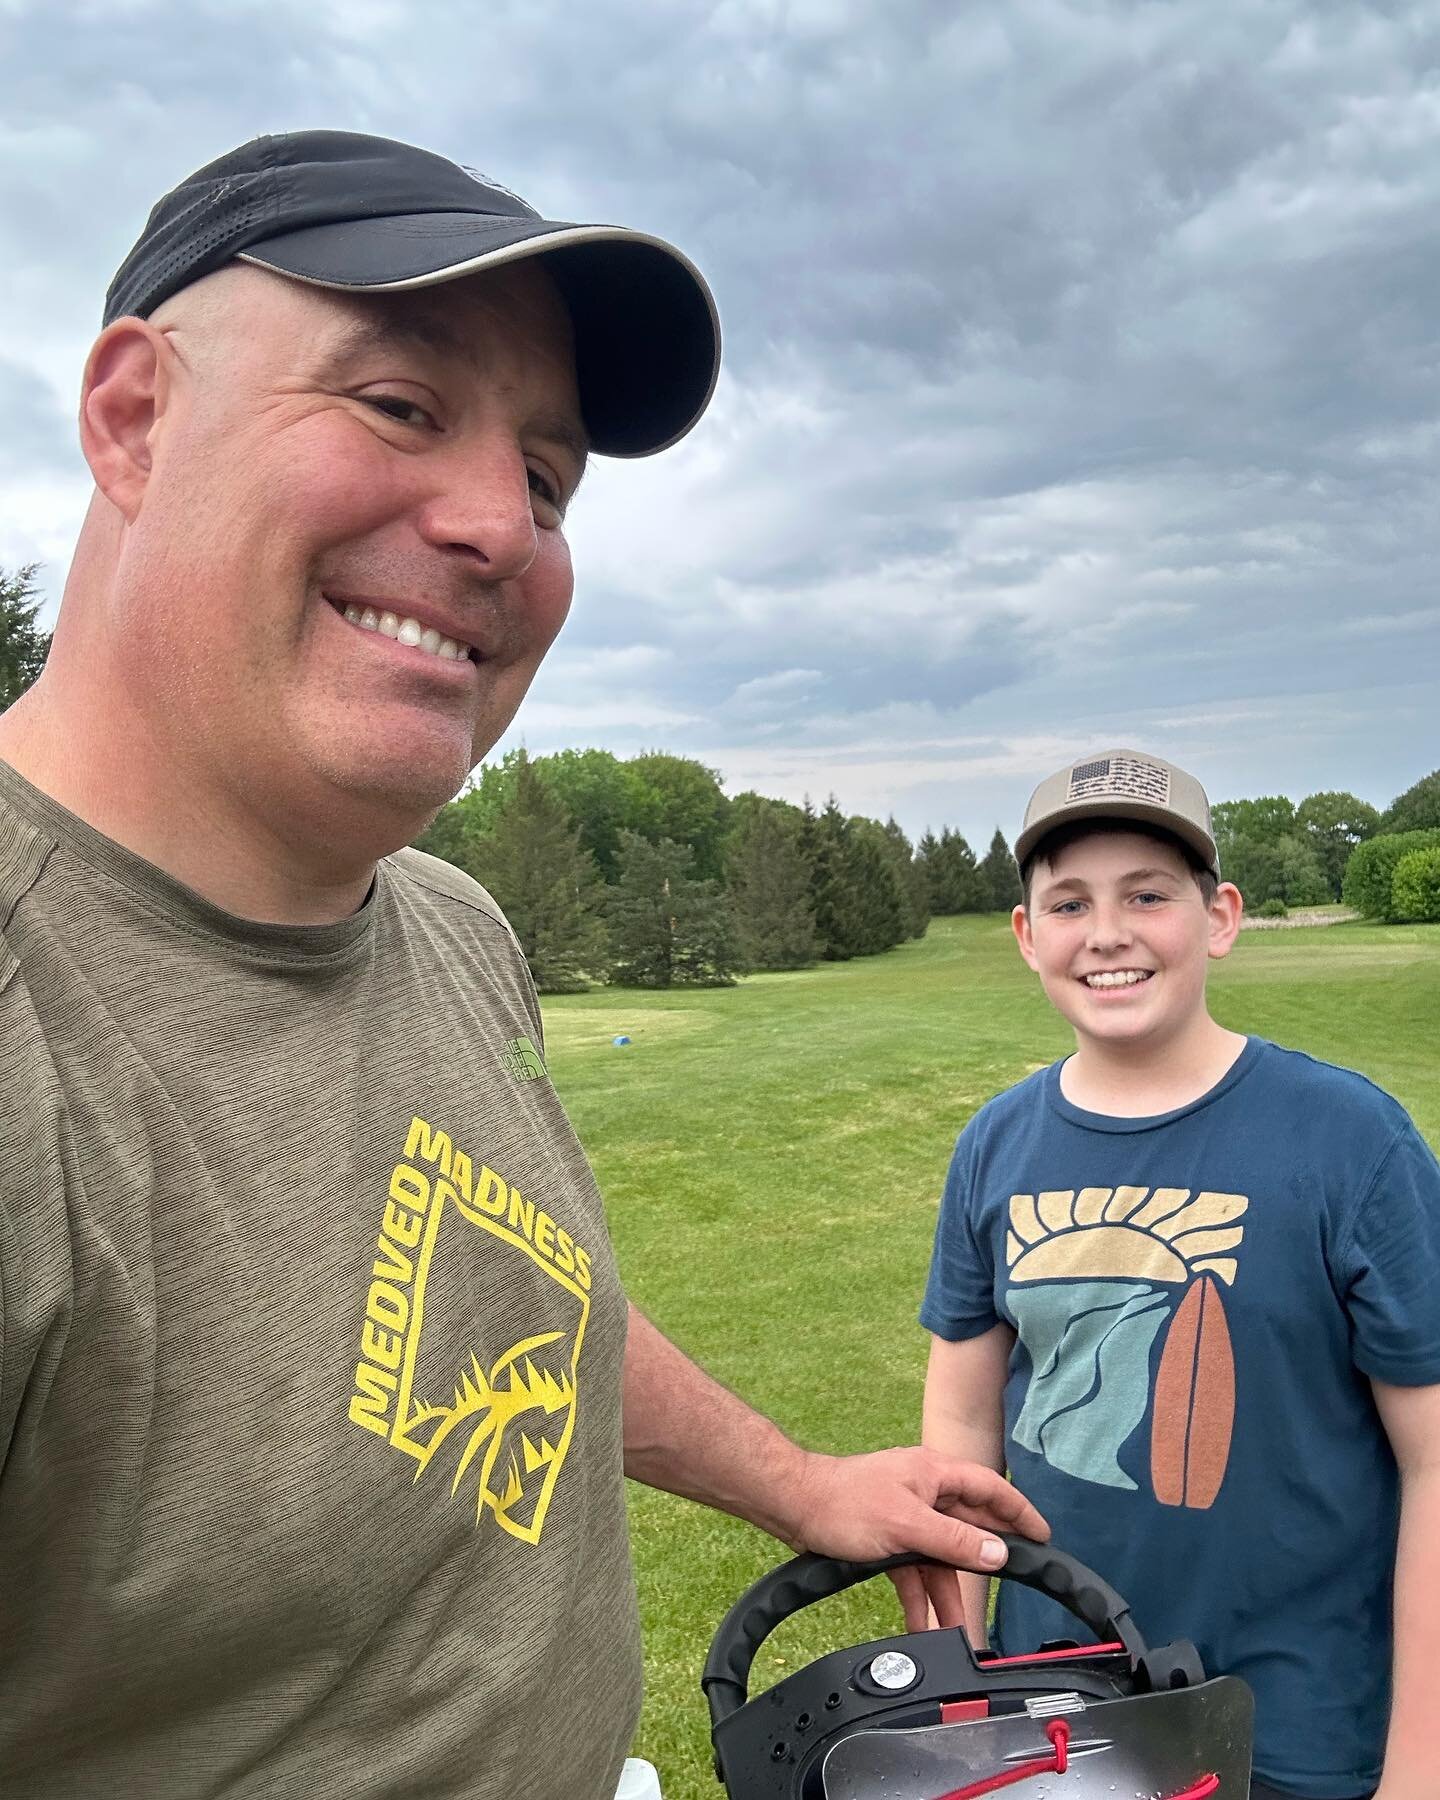 Day 139/365 first round of the season with Luke who is showing a renewed interest in golf. In disc golf news, finessing my approach shot -managed to pull off a birdie &amp; four pars on that back breaker last hole @ Shadow Pines. Of course, I did dou